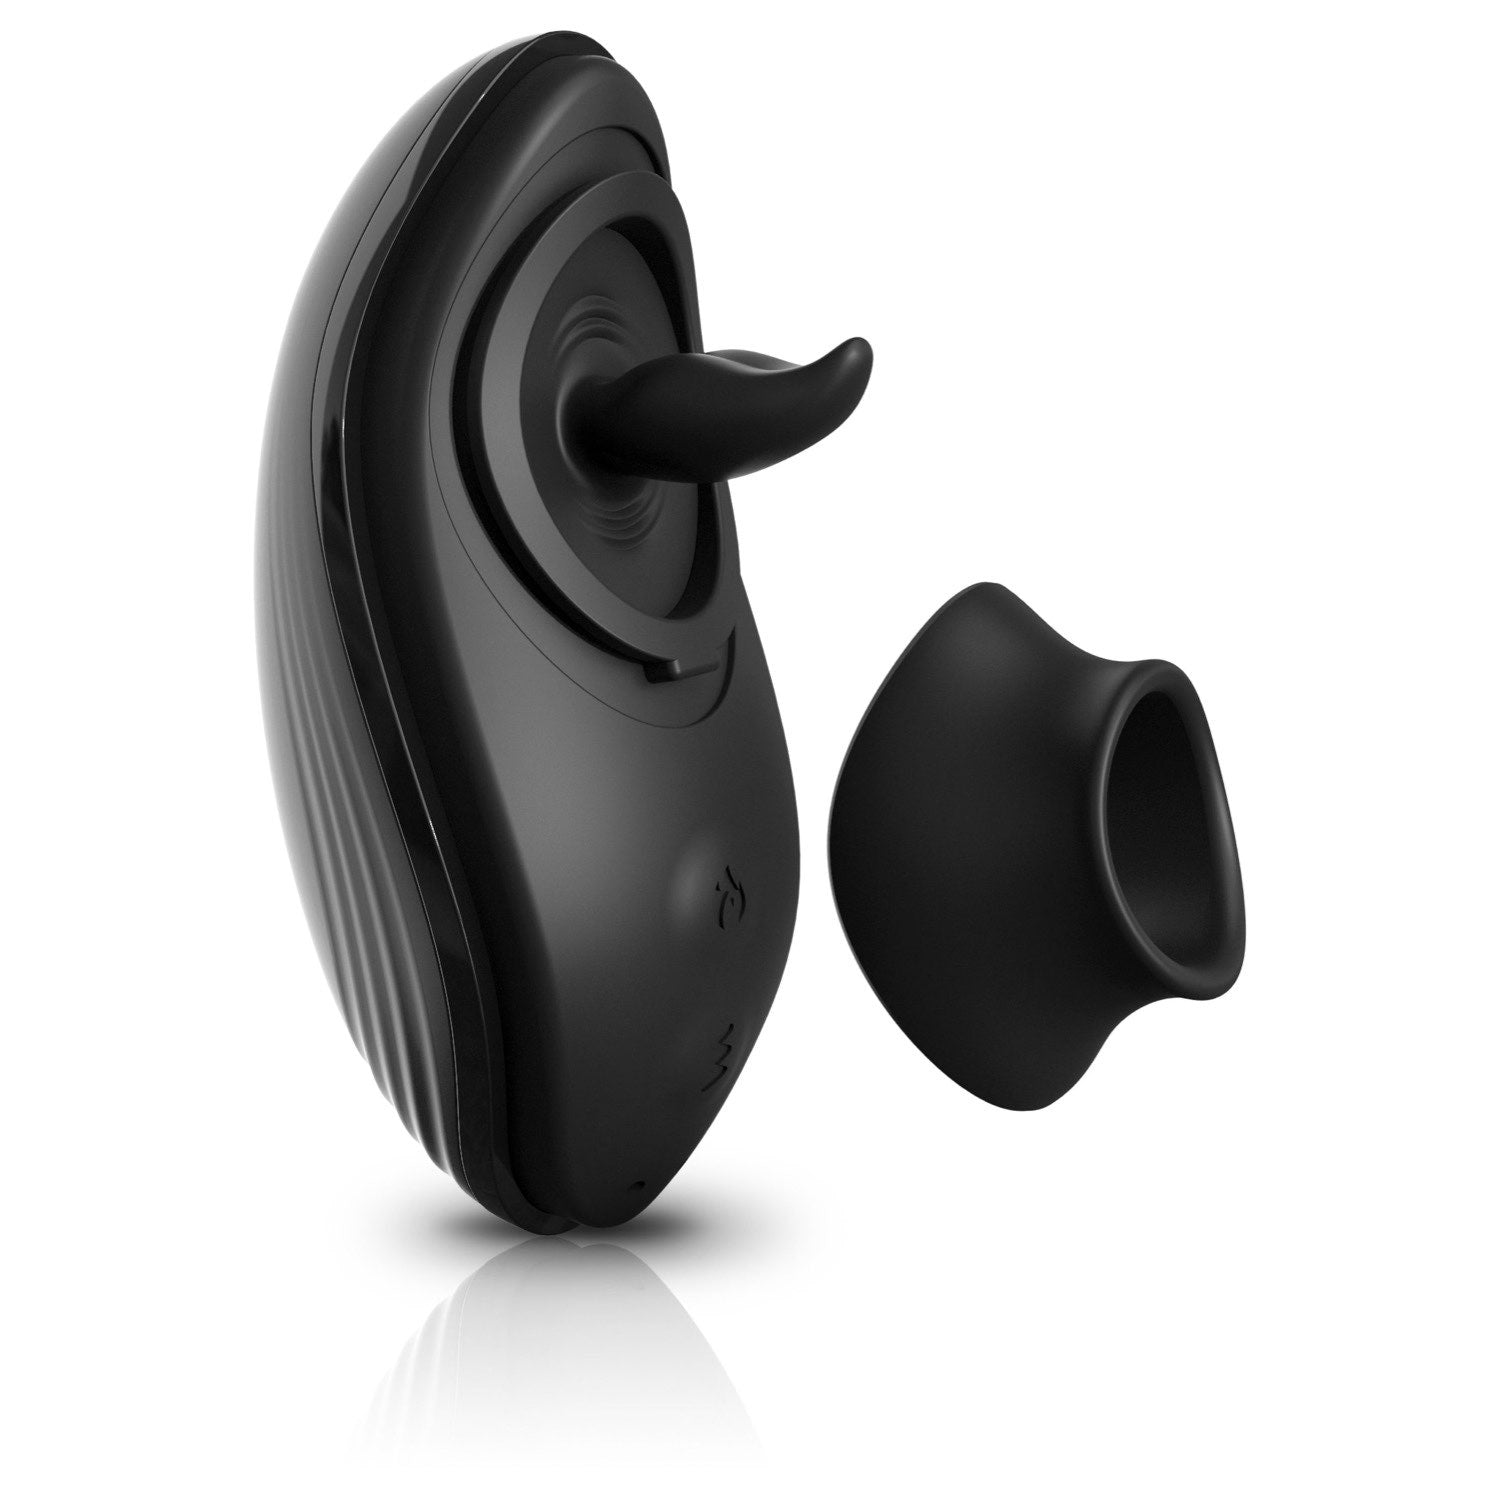 Sir Richards Control Silicone Rim Joy - Black USB Rechargeable Anal Stimulator by Pipedream